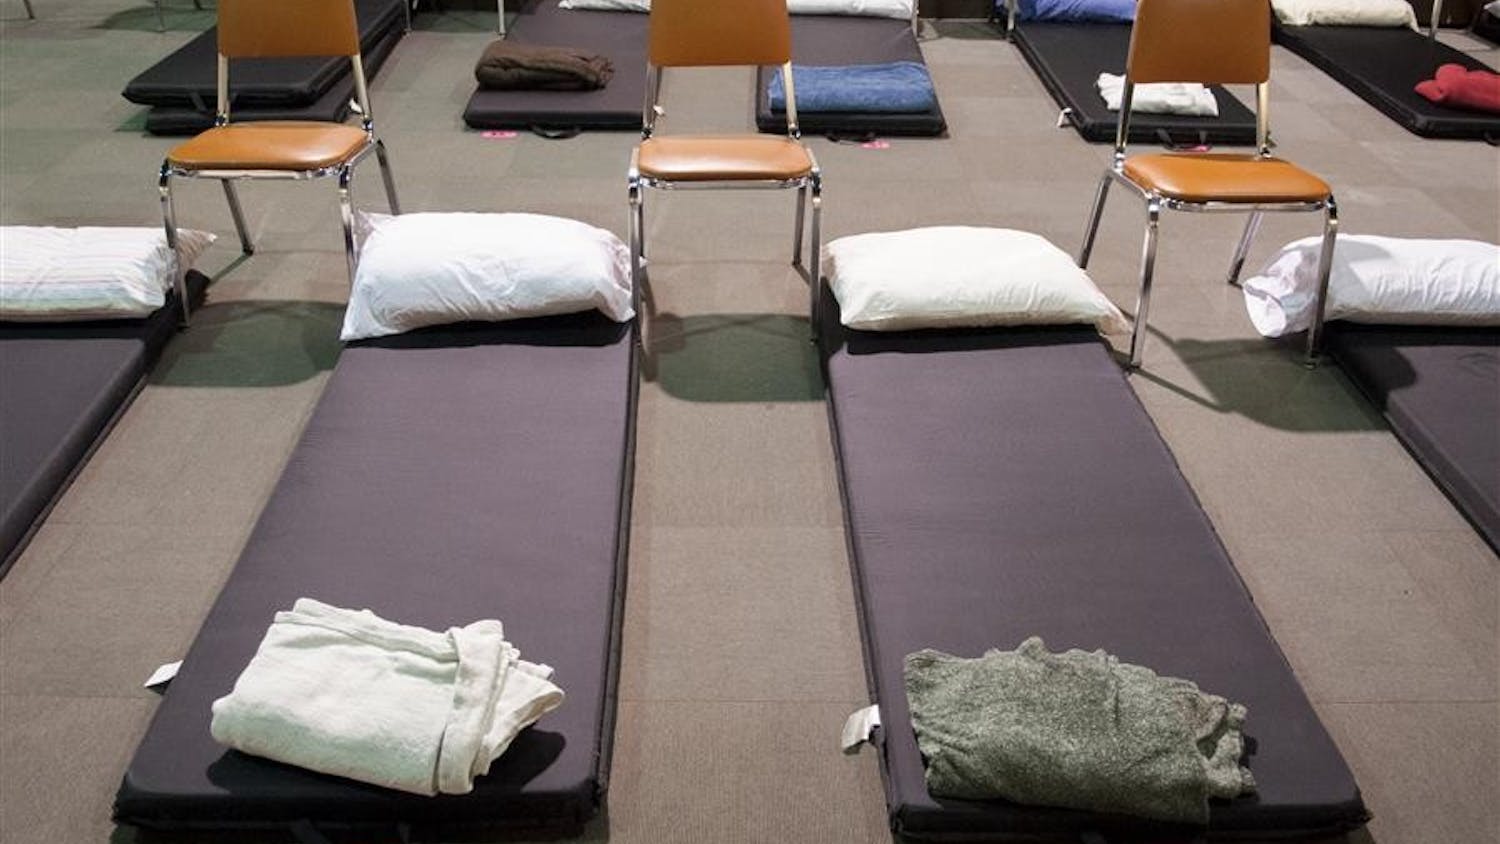 Homeless shelters respond to extreme cold